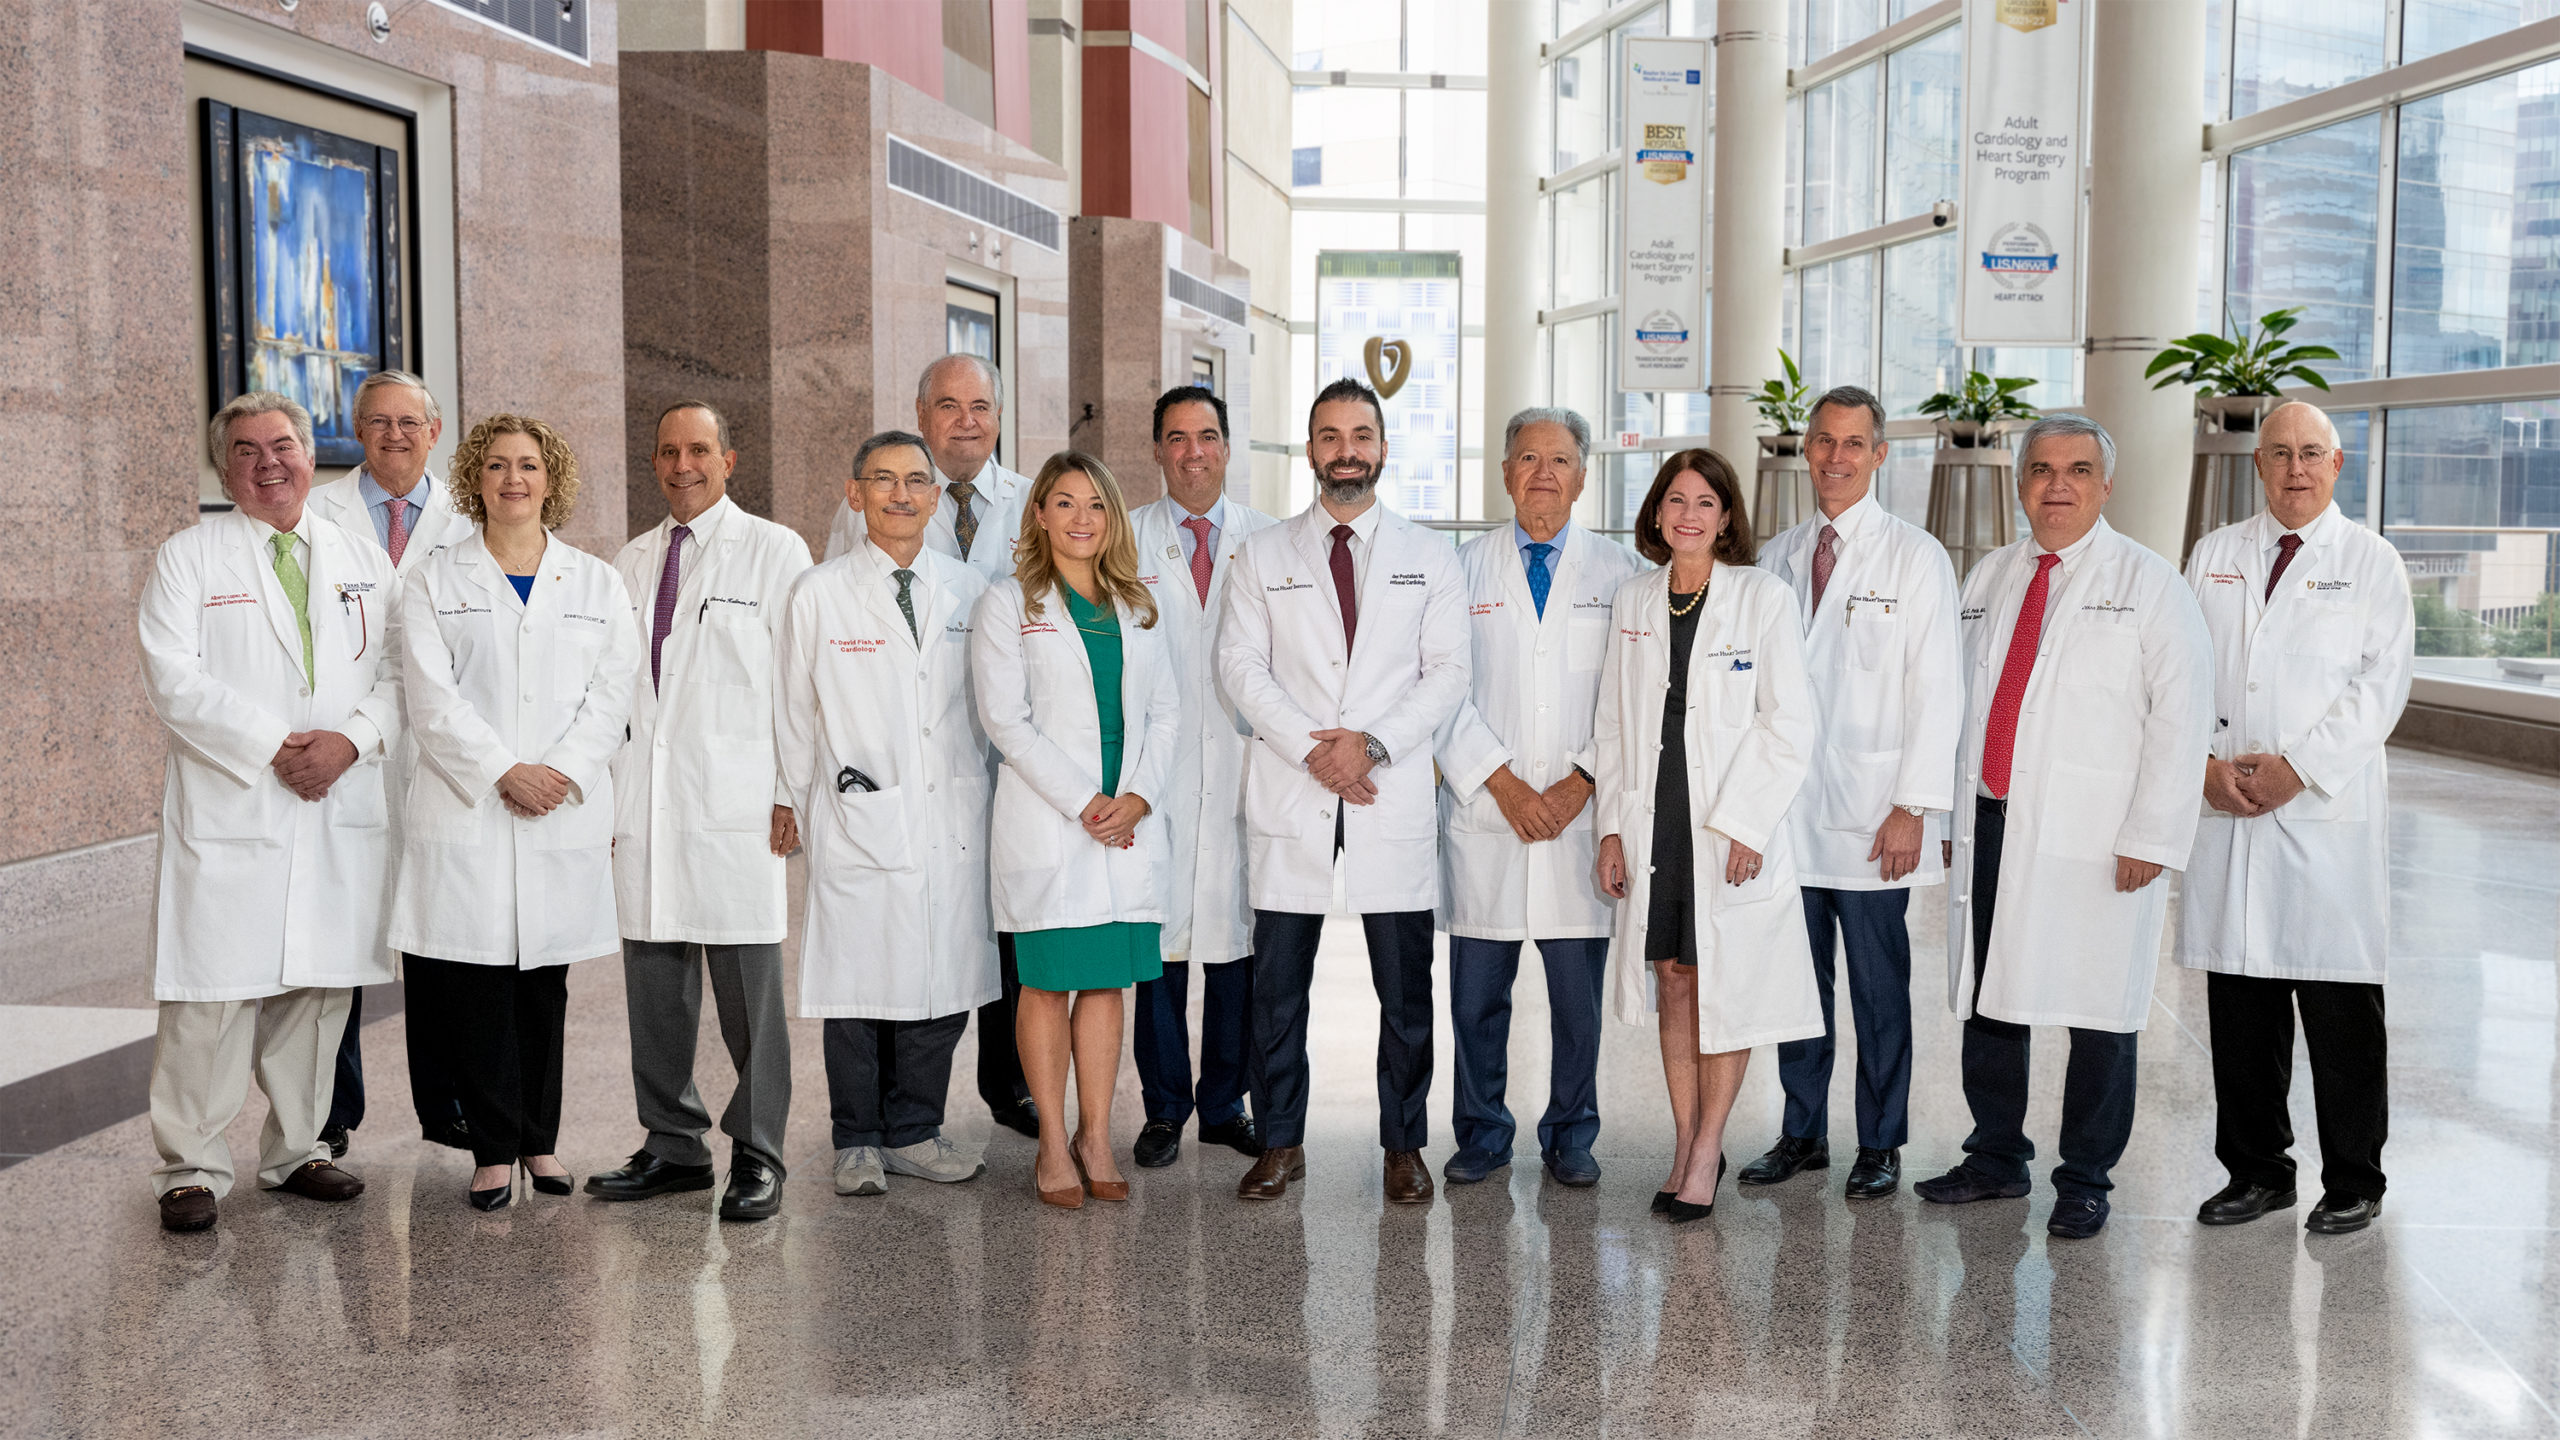 Texas Heart Medical Group is Now The Texas Heart Institute Center for Cardiovascular Care
 - The Center is moving to a new location designed to enhance patient care.